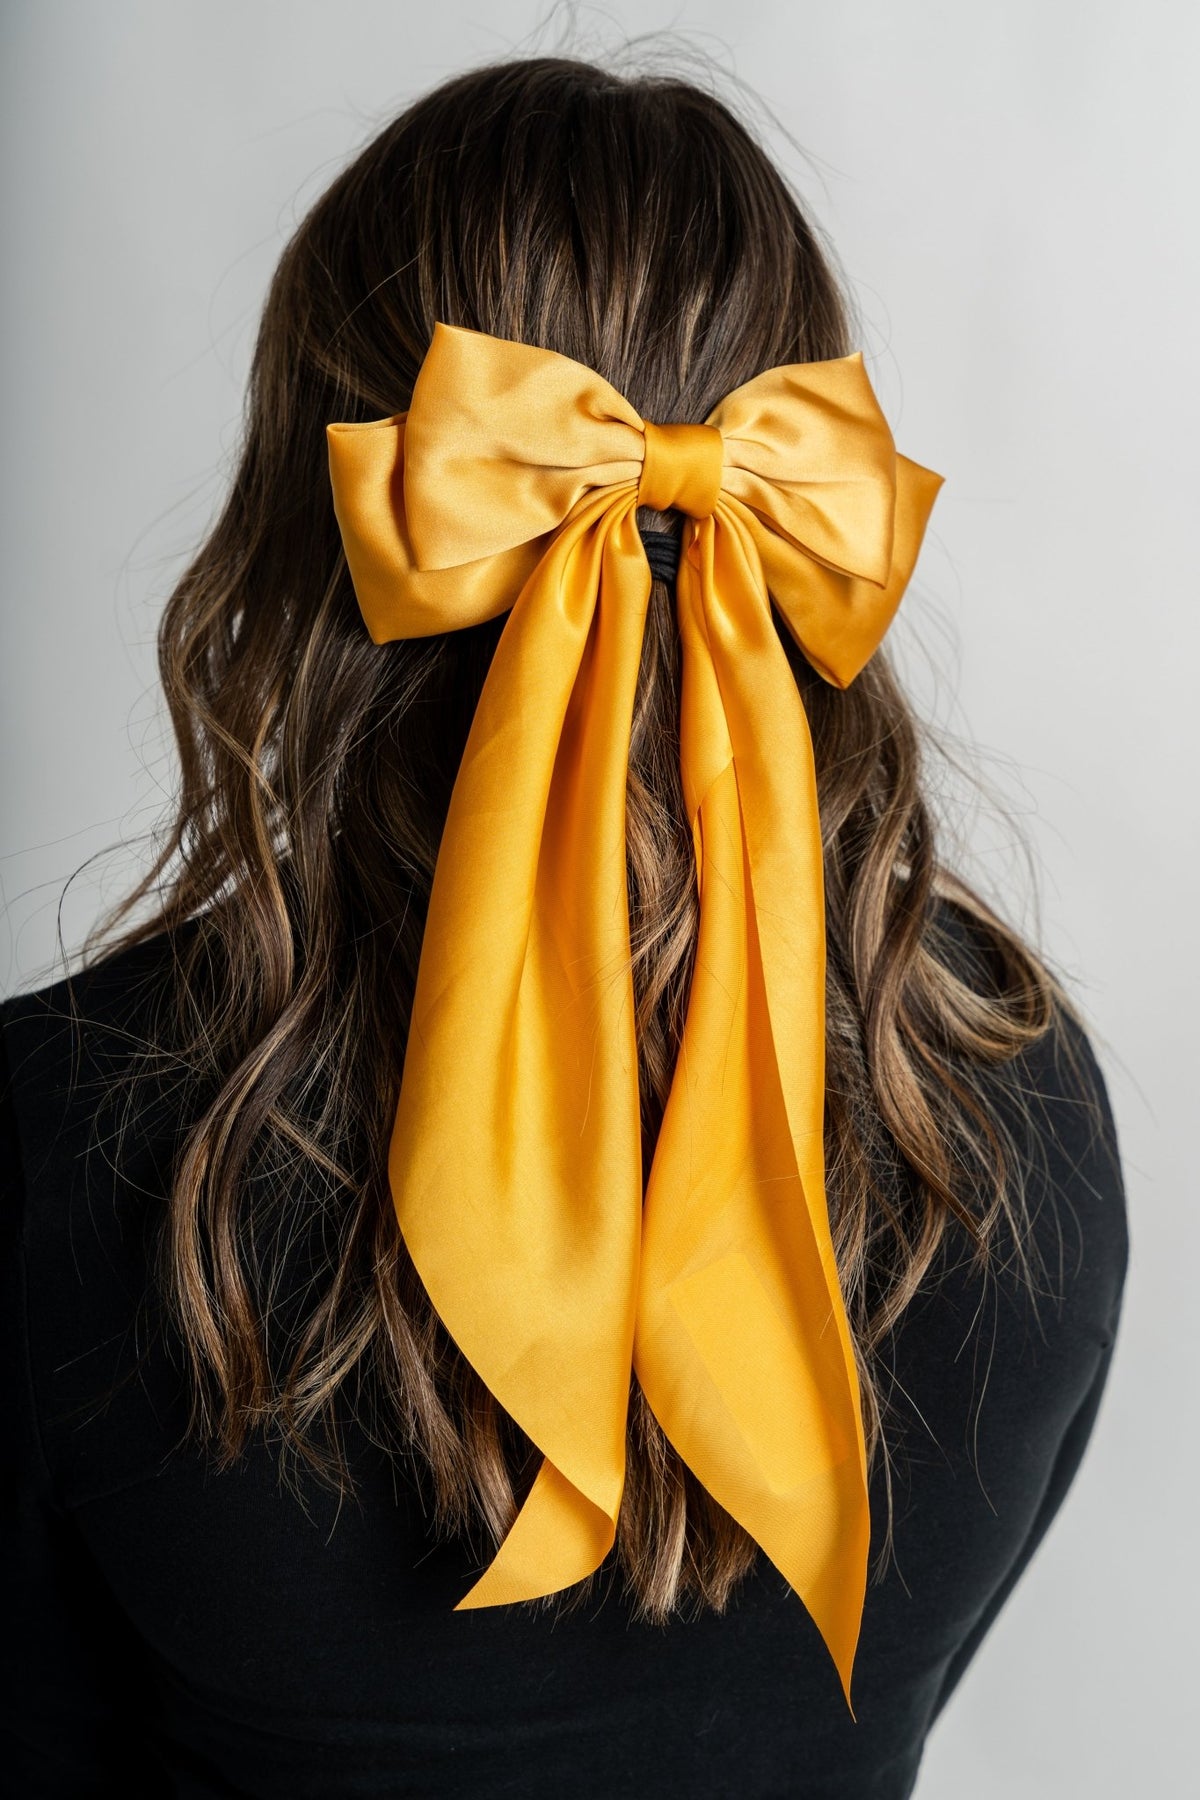 Butterfly satin hair bow clip yellow - Trendy Gifts at Lush Fashion Lounge Boutique in Oklahoma City